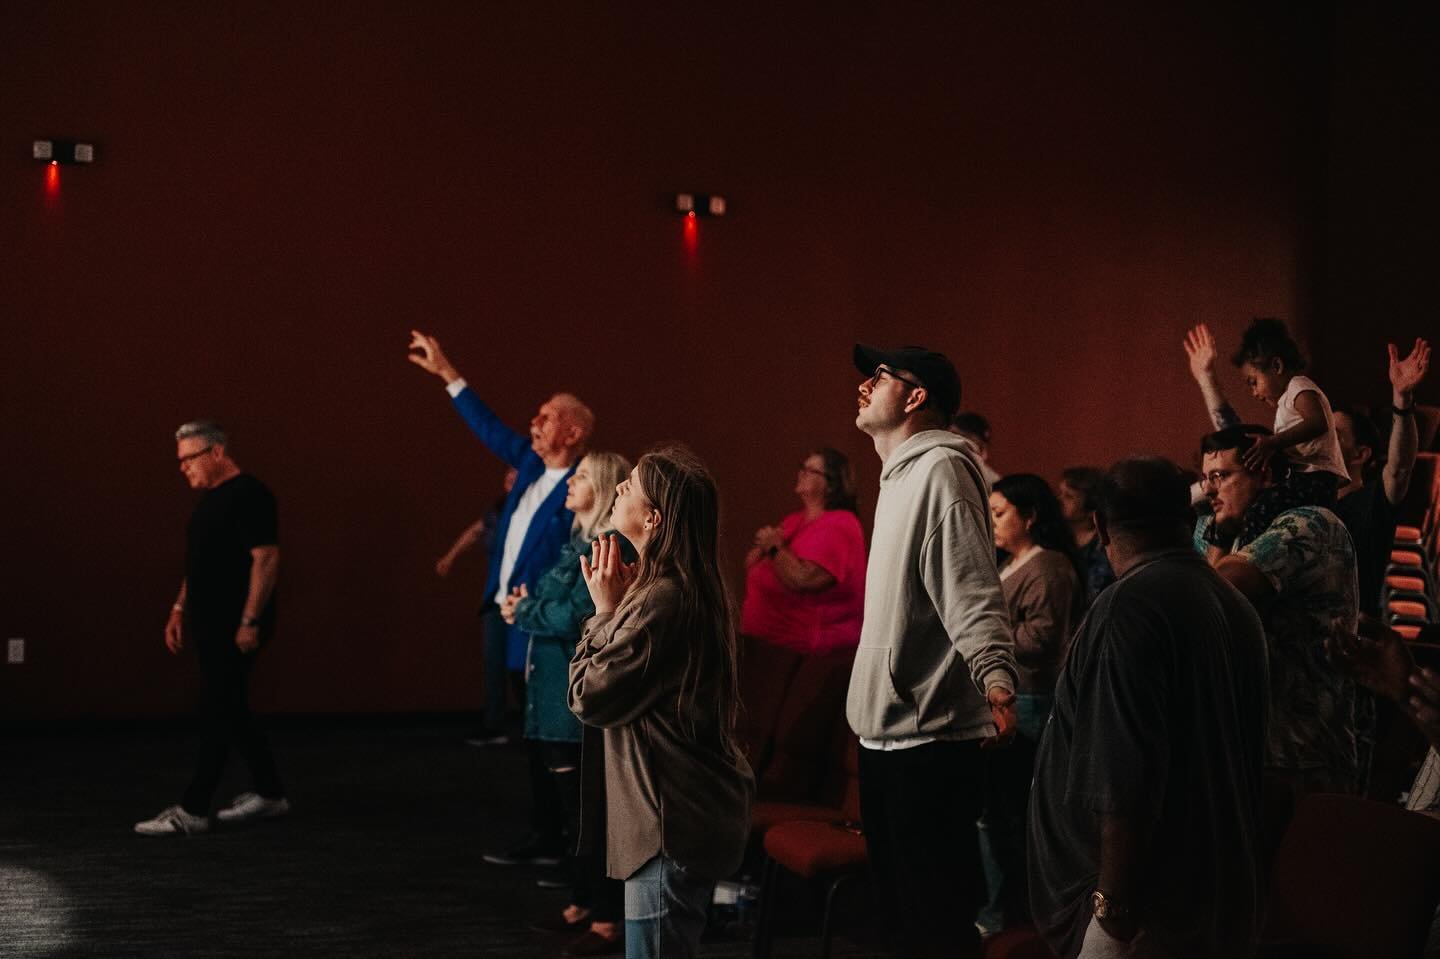 We can&rsquo;t stop thinking about this past Sunday and are counting down until we get to gather to worship again this weekend. God is moving here in Frisco TX!